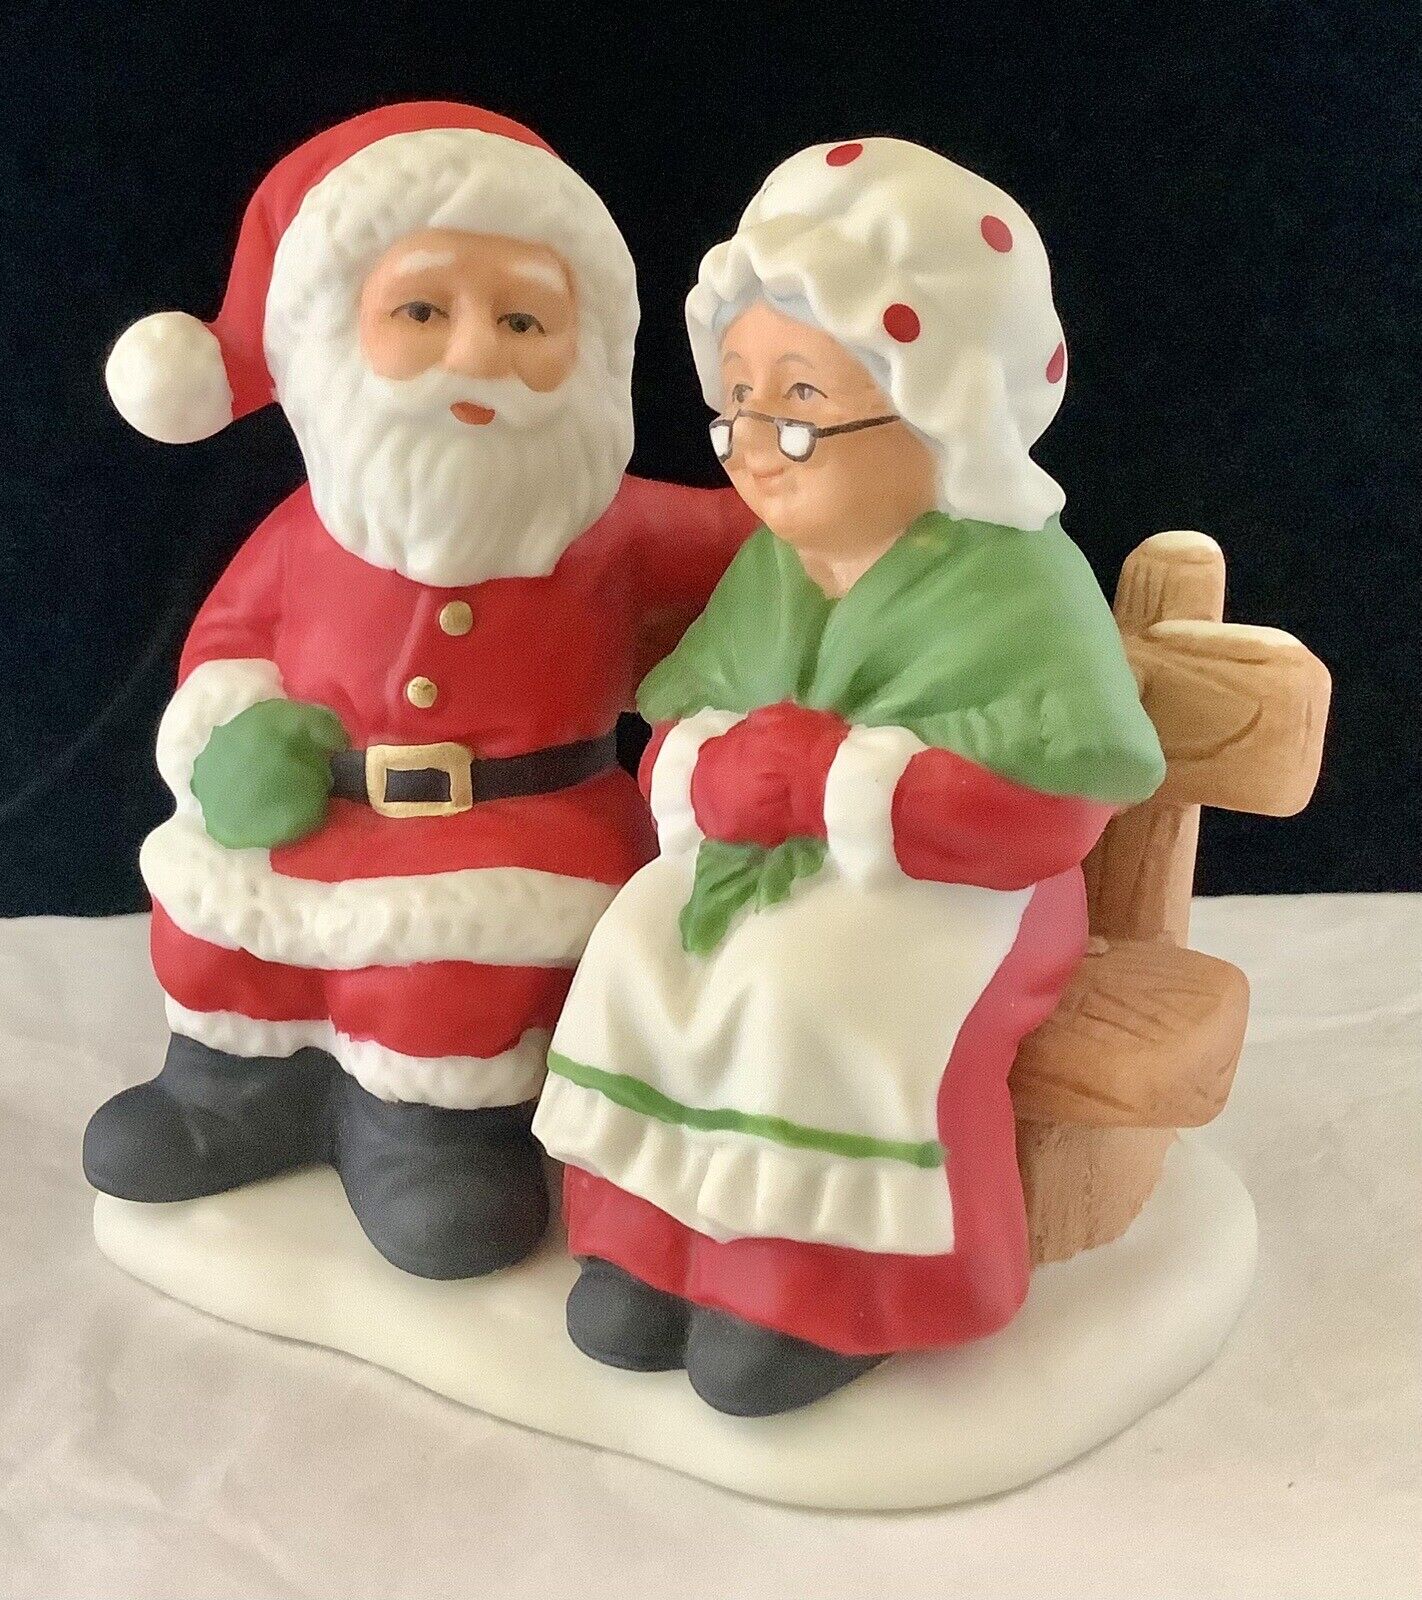 VTG Christmas Figurine Lefton Santa And Mrs Claus On A Snowy Bench 1990 07922